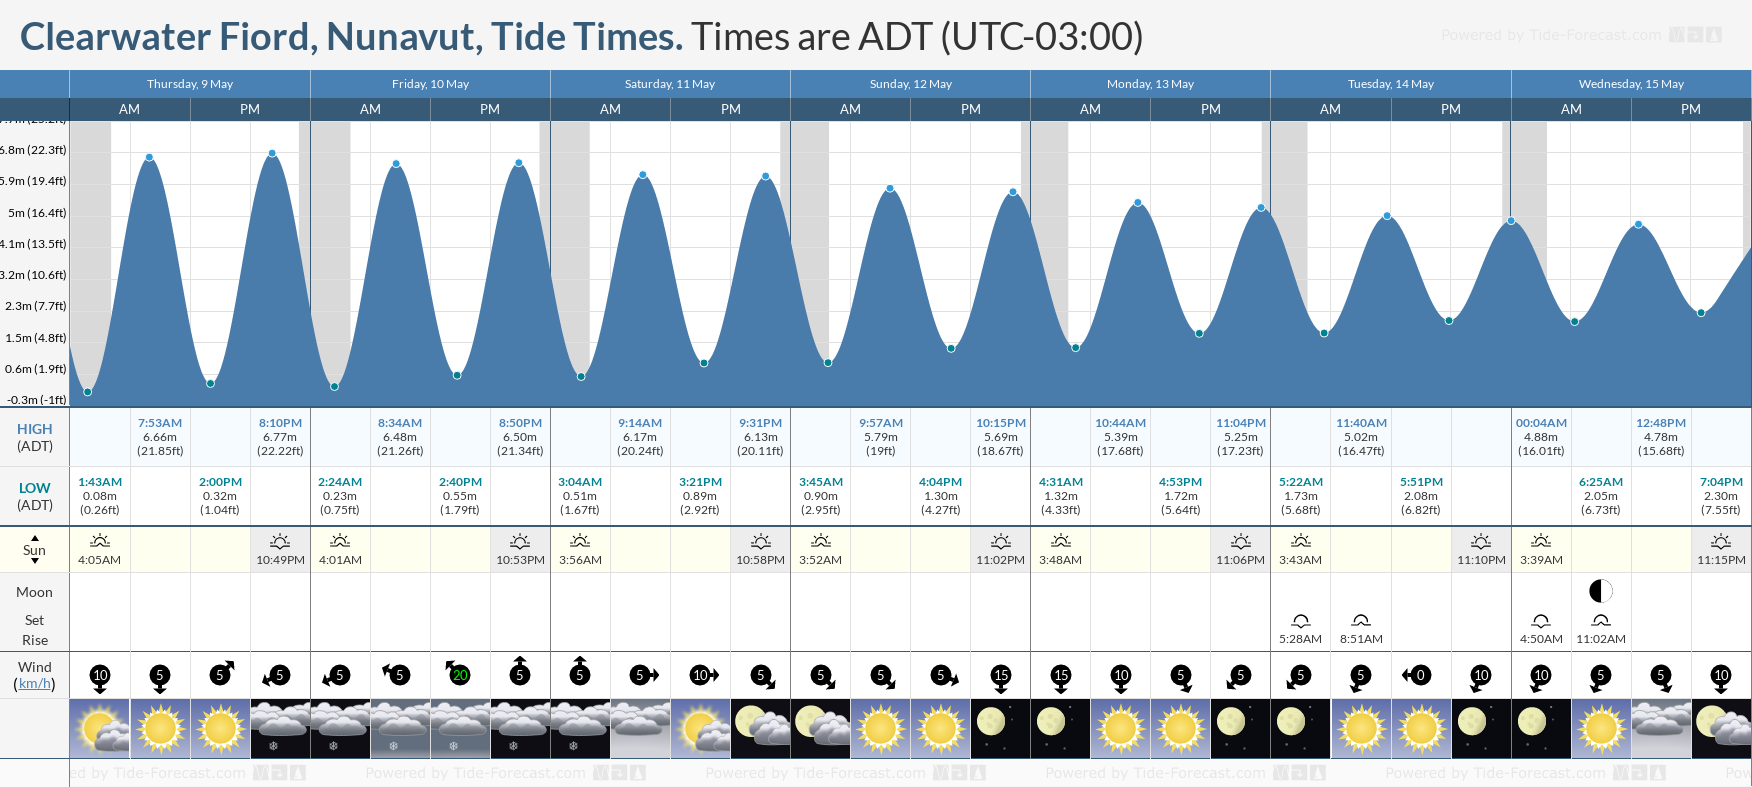 Clearwater Fiord, Nunavut Tide Chart including high and low tide times for the next 7 days